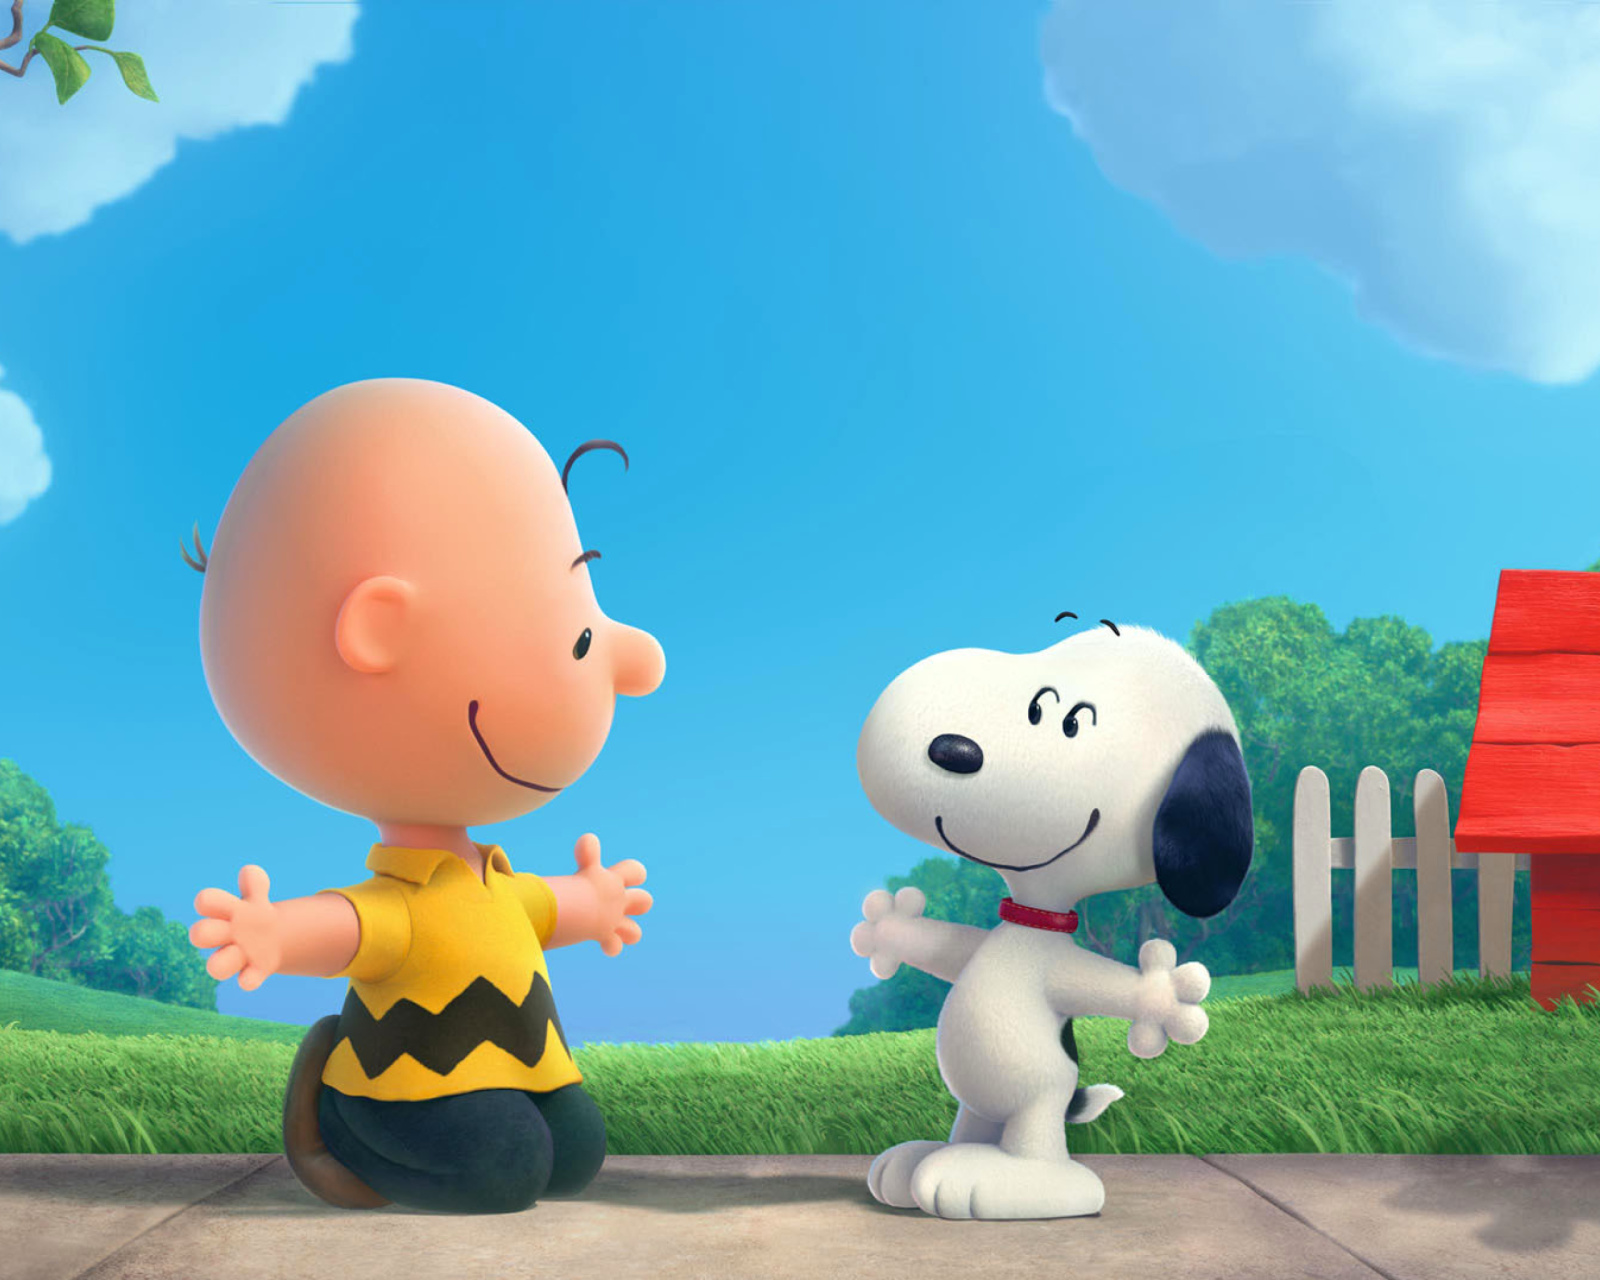 The Peanuts Movie with Snoopy and Charlie Brown screenshot #1 1600x1280